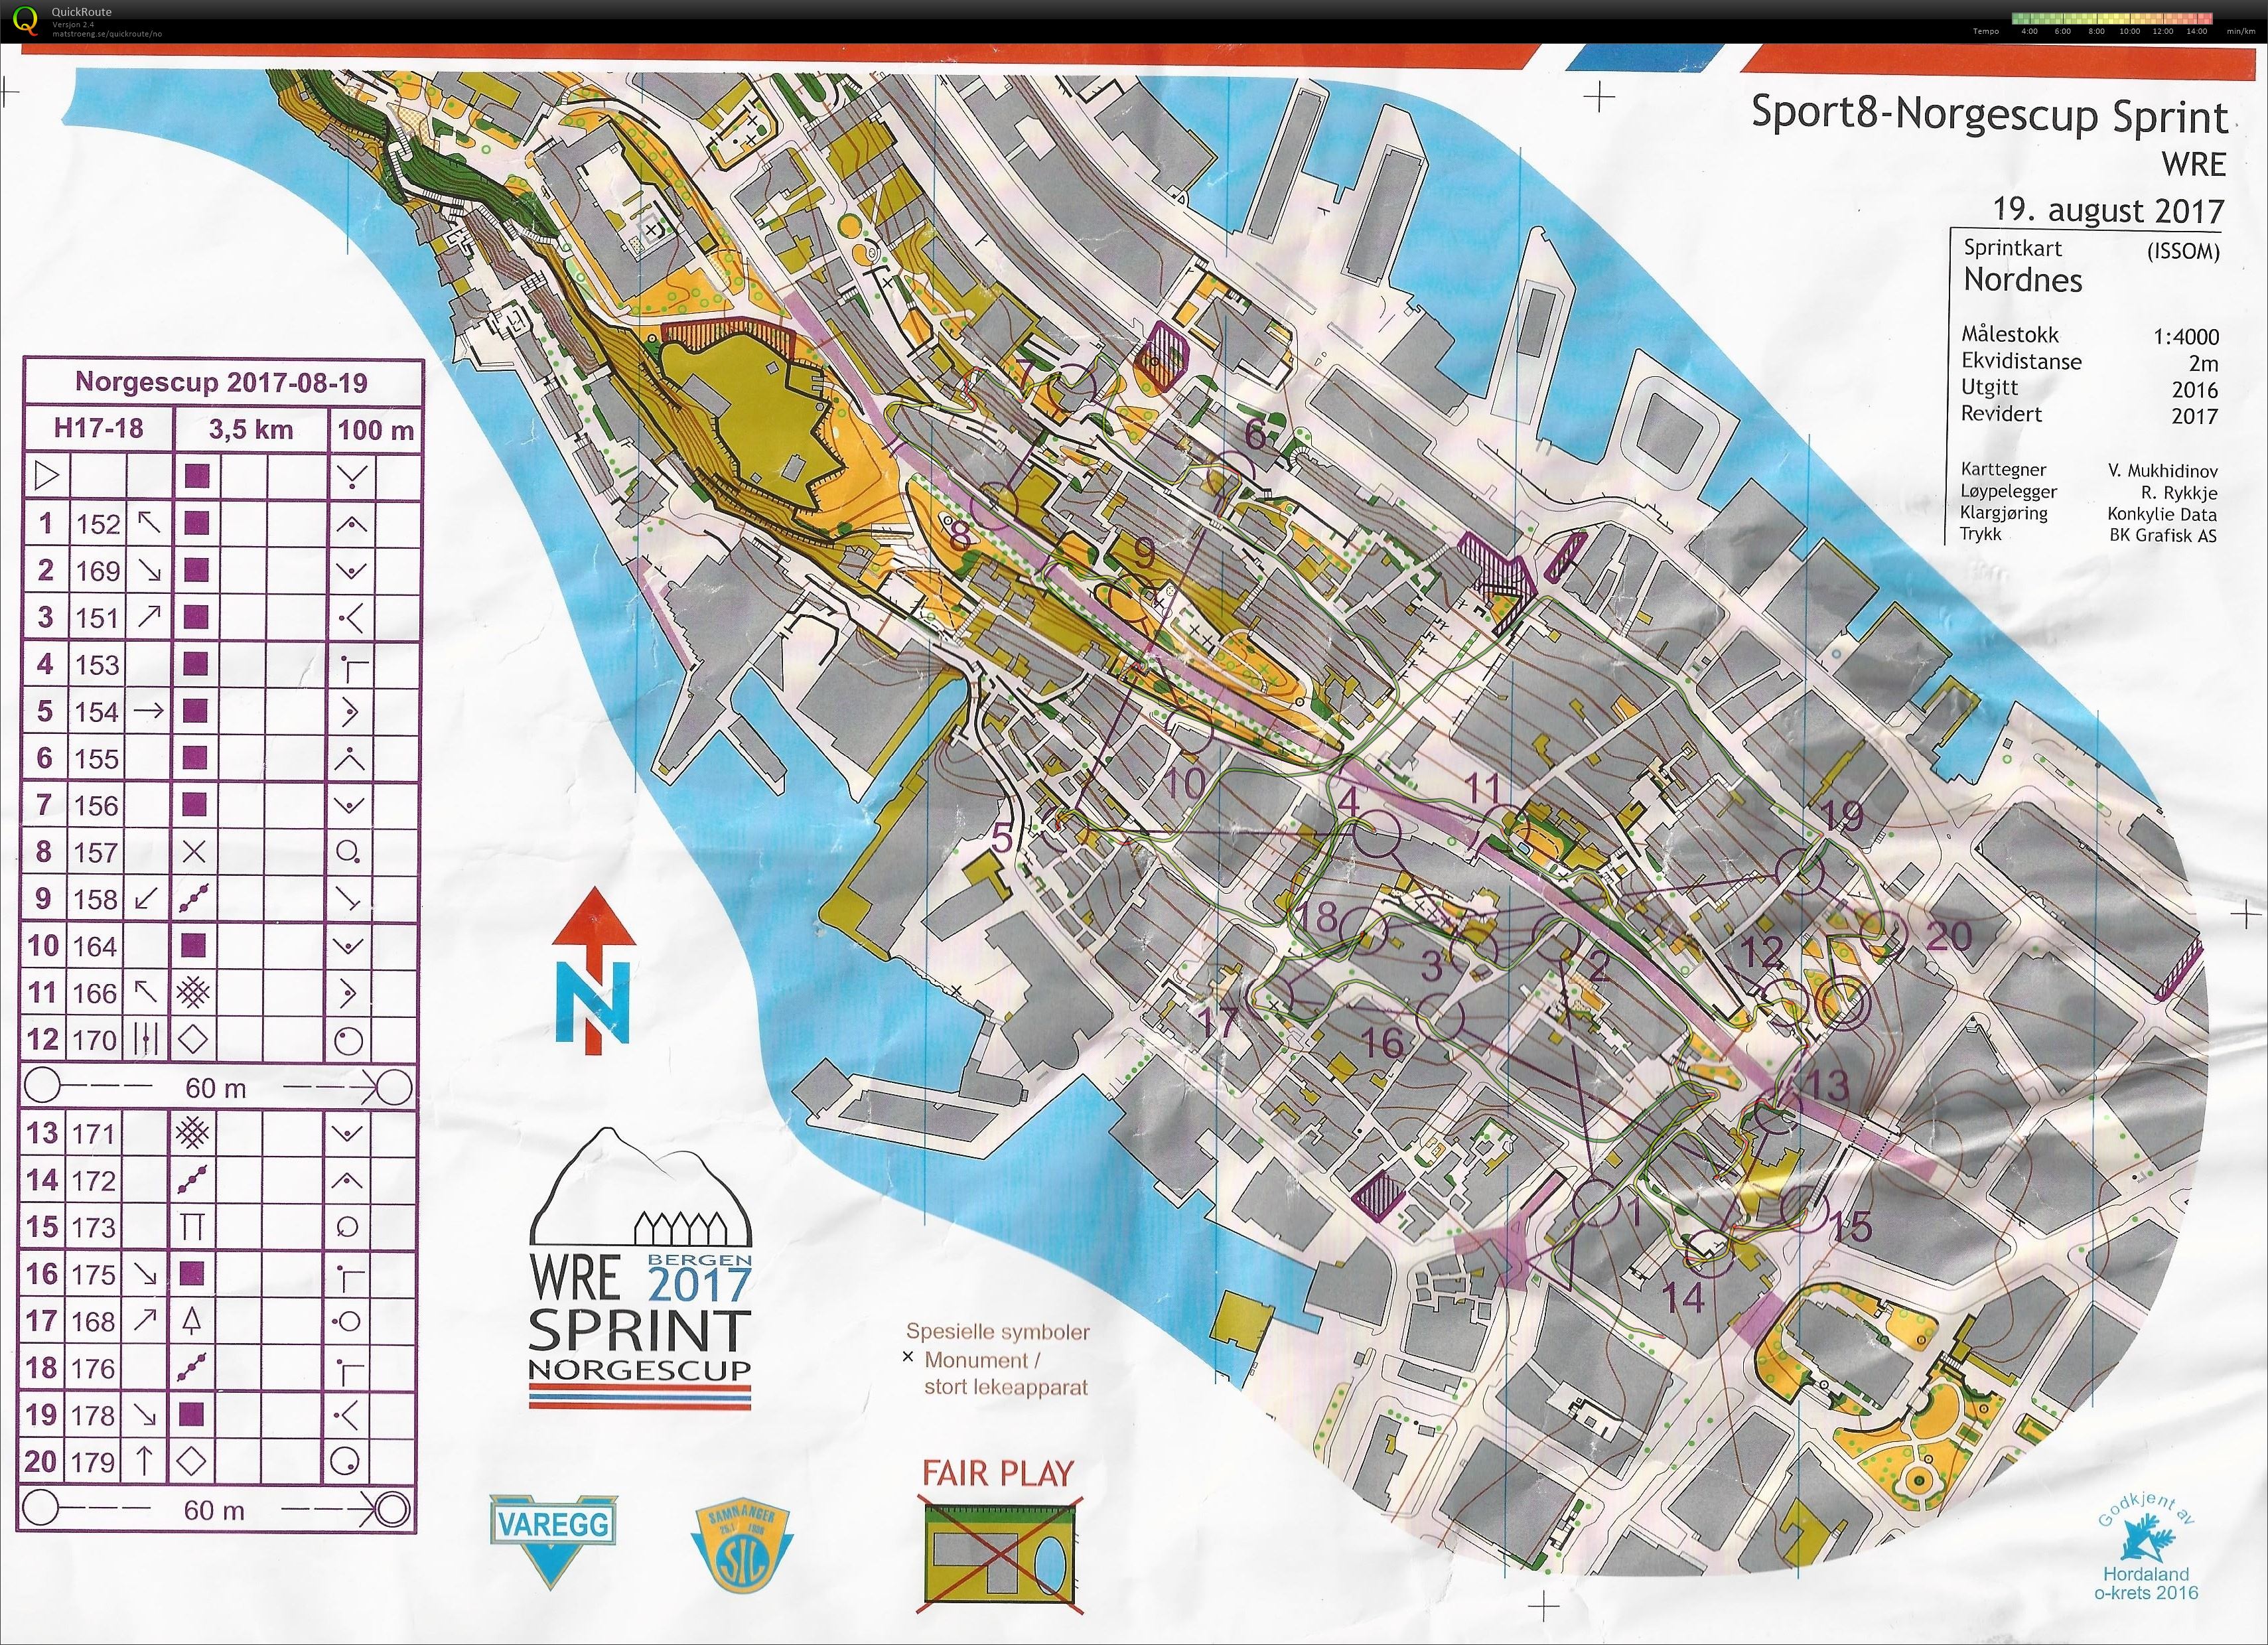 Norgescup sprint (18.08.2017)